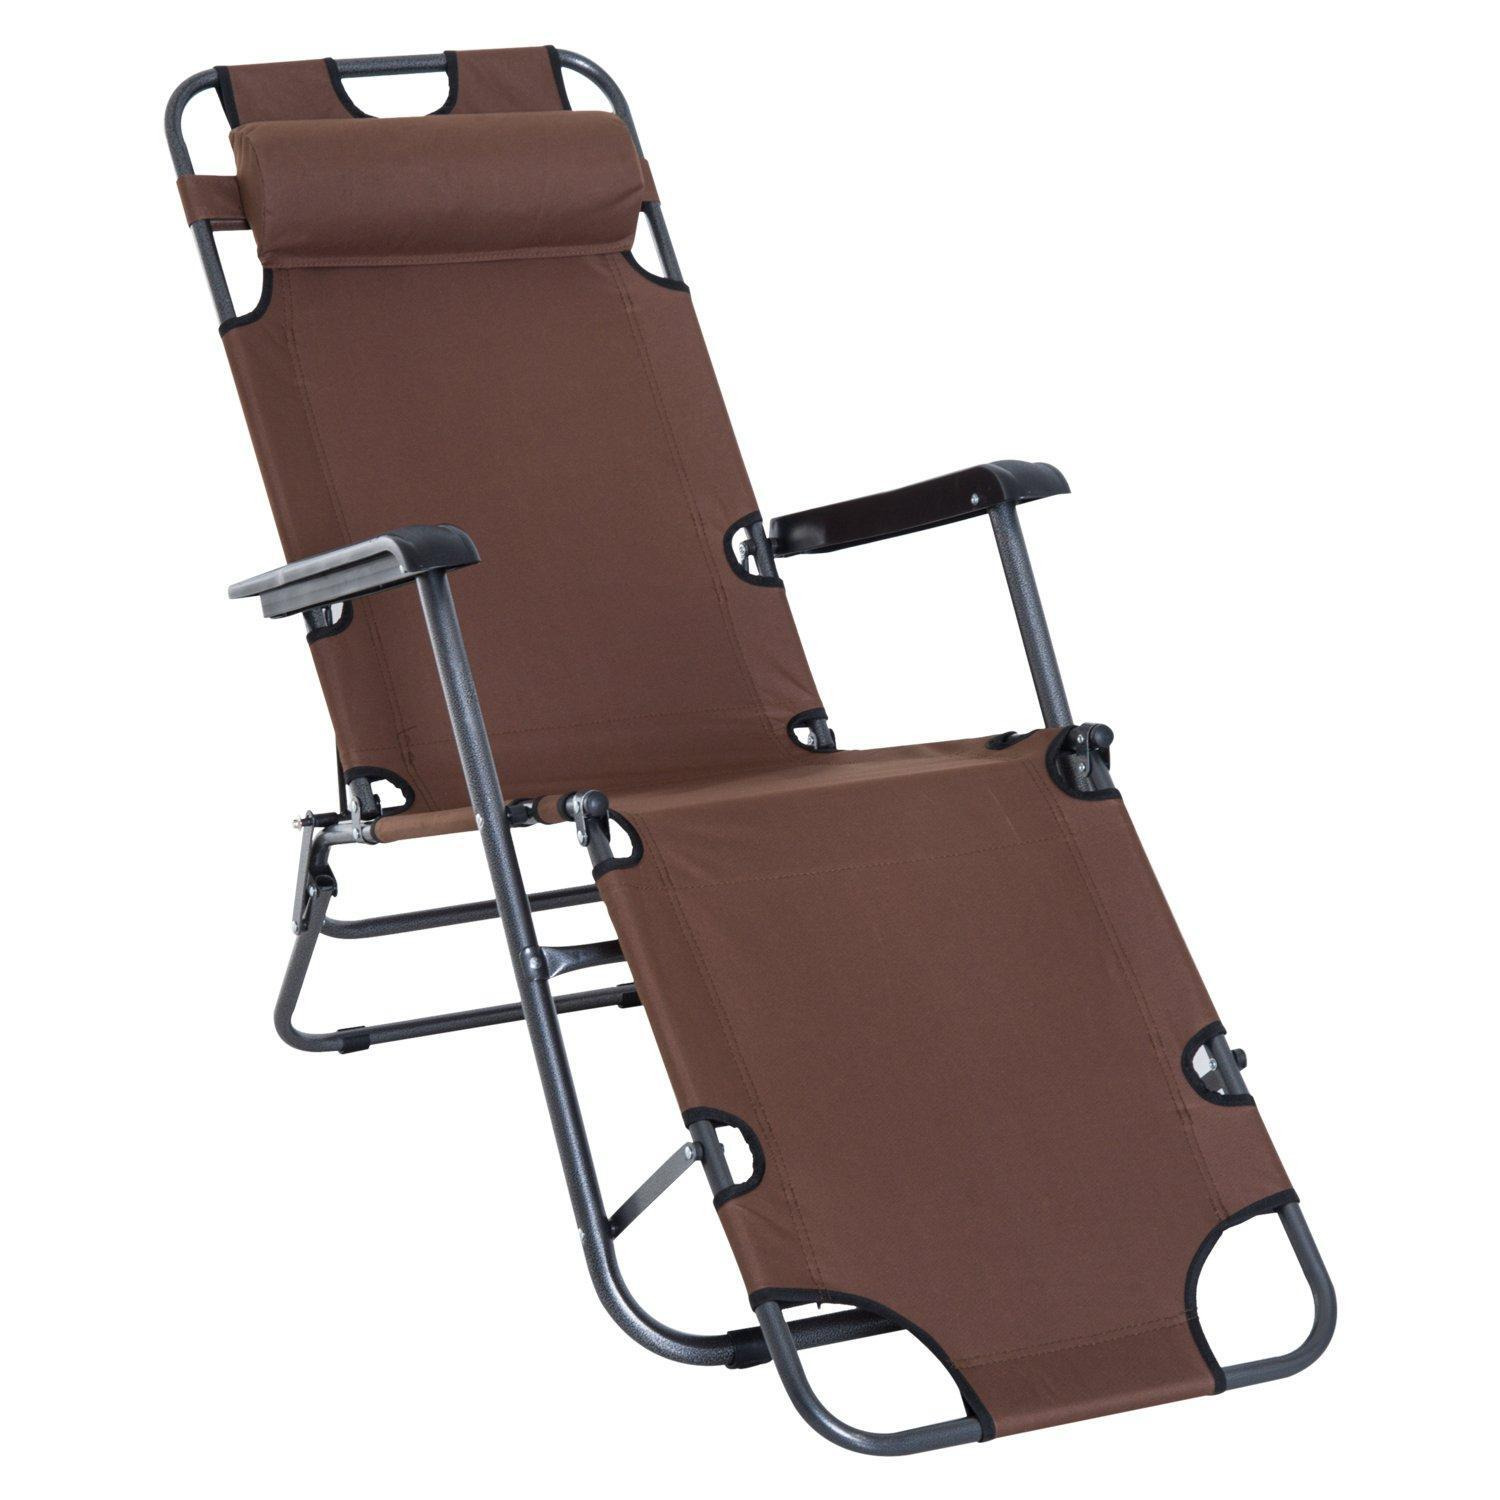 2 in 1 Outdoor Folding Sun Lounger with Adjustable Back and Pillow - image 1